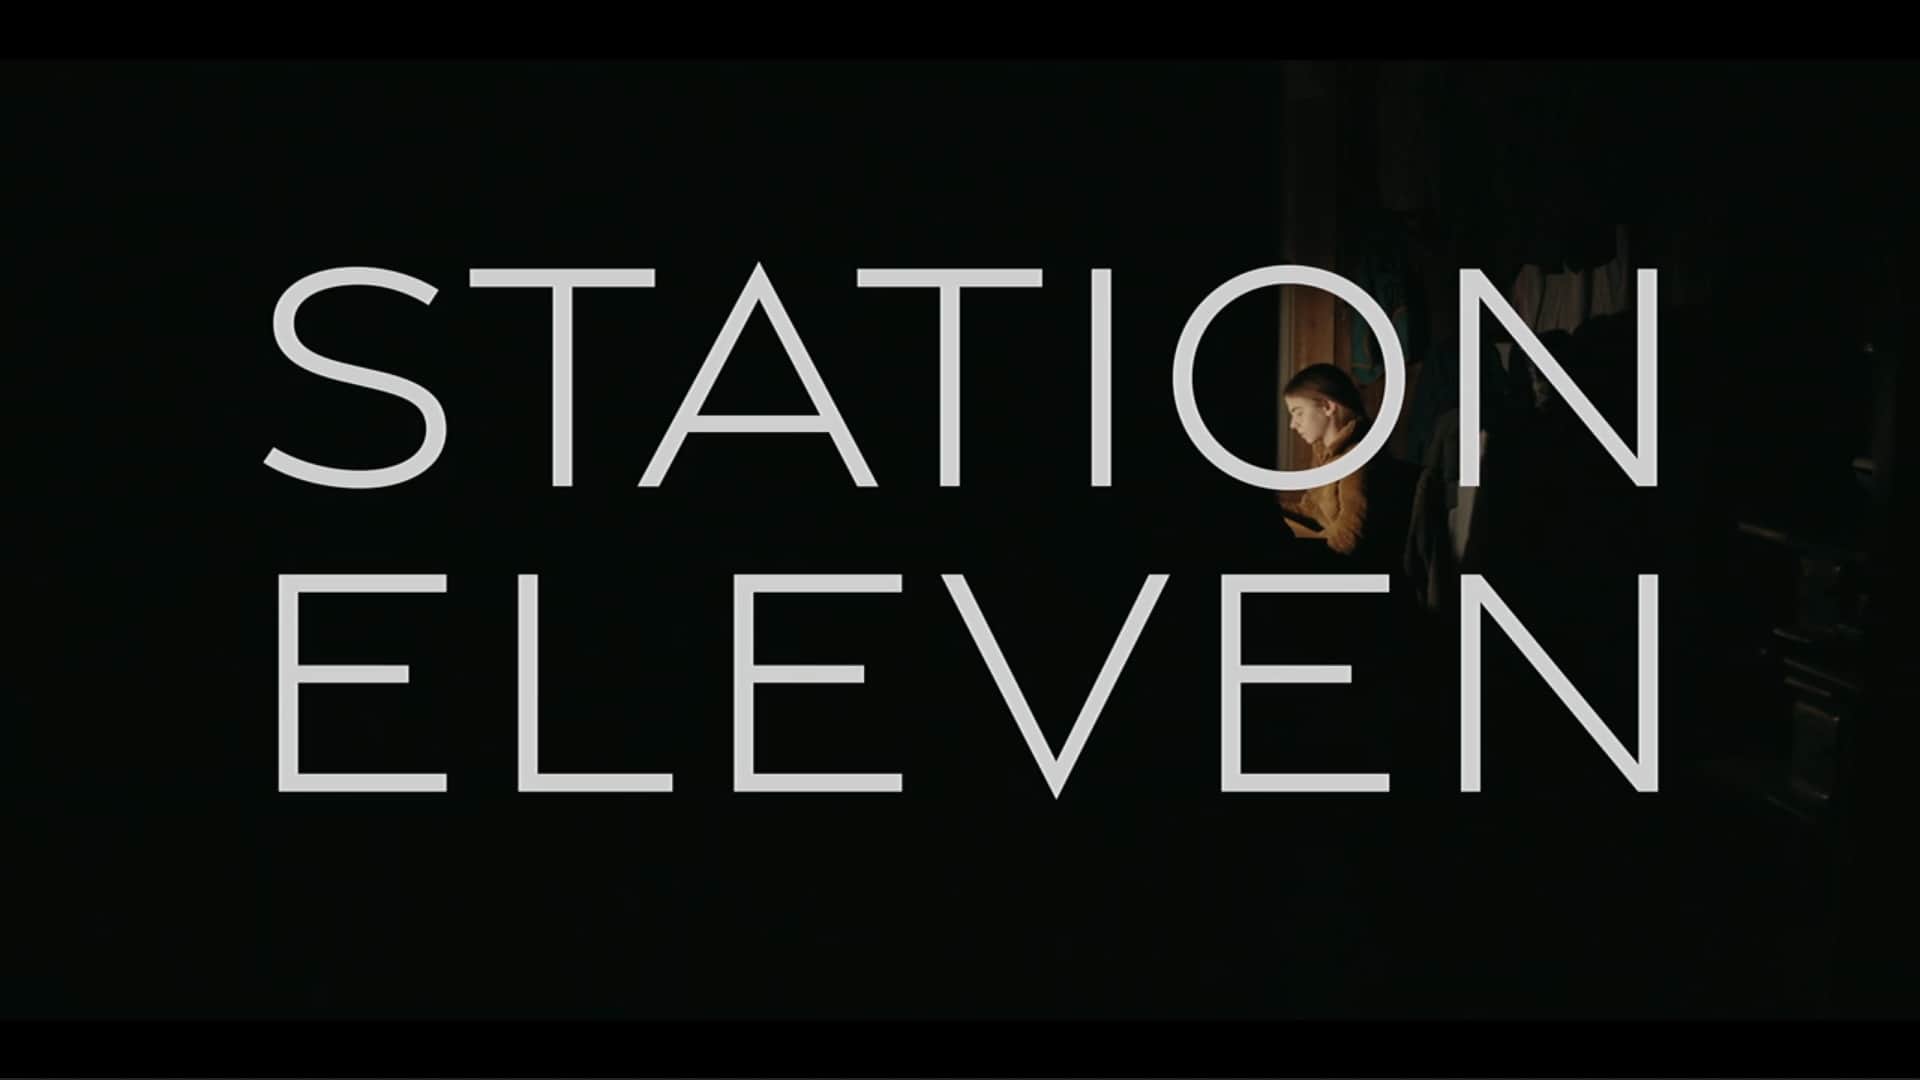 Title Card - Station Eleven Season 1 Episode 9 “Dr. Chaudhary”